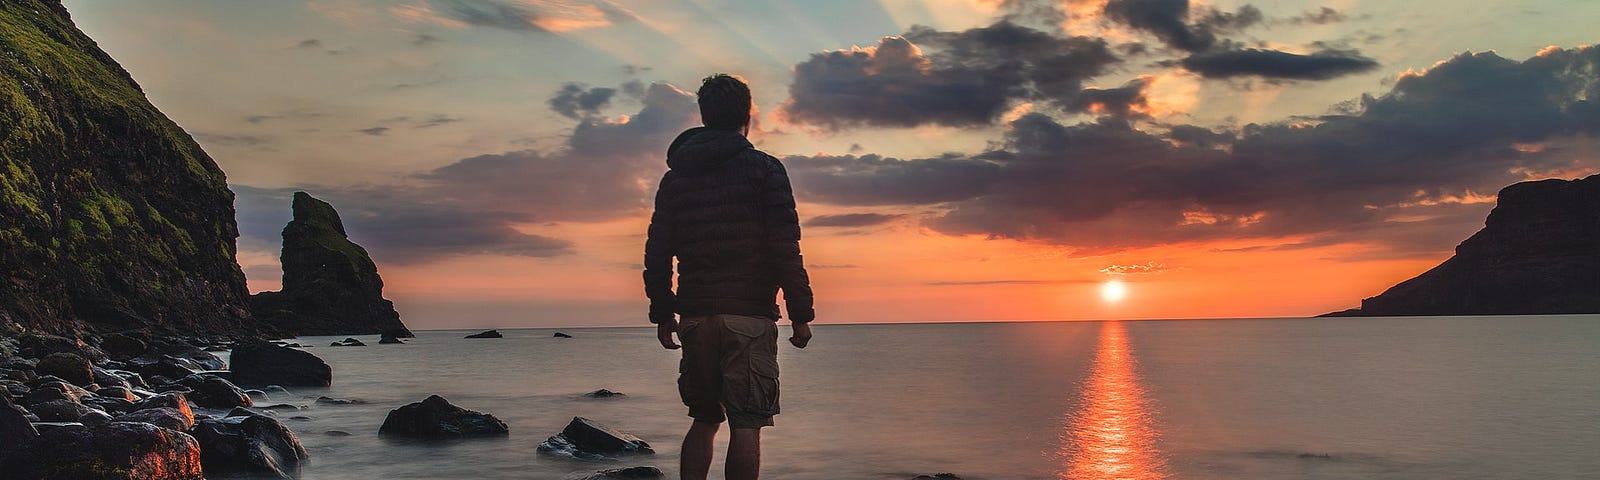 Photo of a man standing on a rock in the water. He’s wearing shorts and a long-sleeve jacket. He’s facing away from the camera and looking at a pink orange sunrise, peaking on the horizon at the distant water’s edge. The sun’s rays shine up and out, piercing the grey and white clouds in the sky. The edges of the photo show rocks and mountain in the dark foreground on the left, near the man. There’s a mountain or land in the far background on the right.